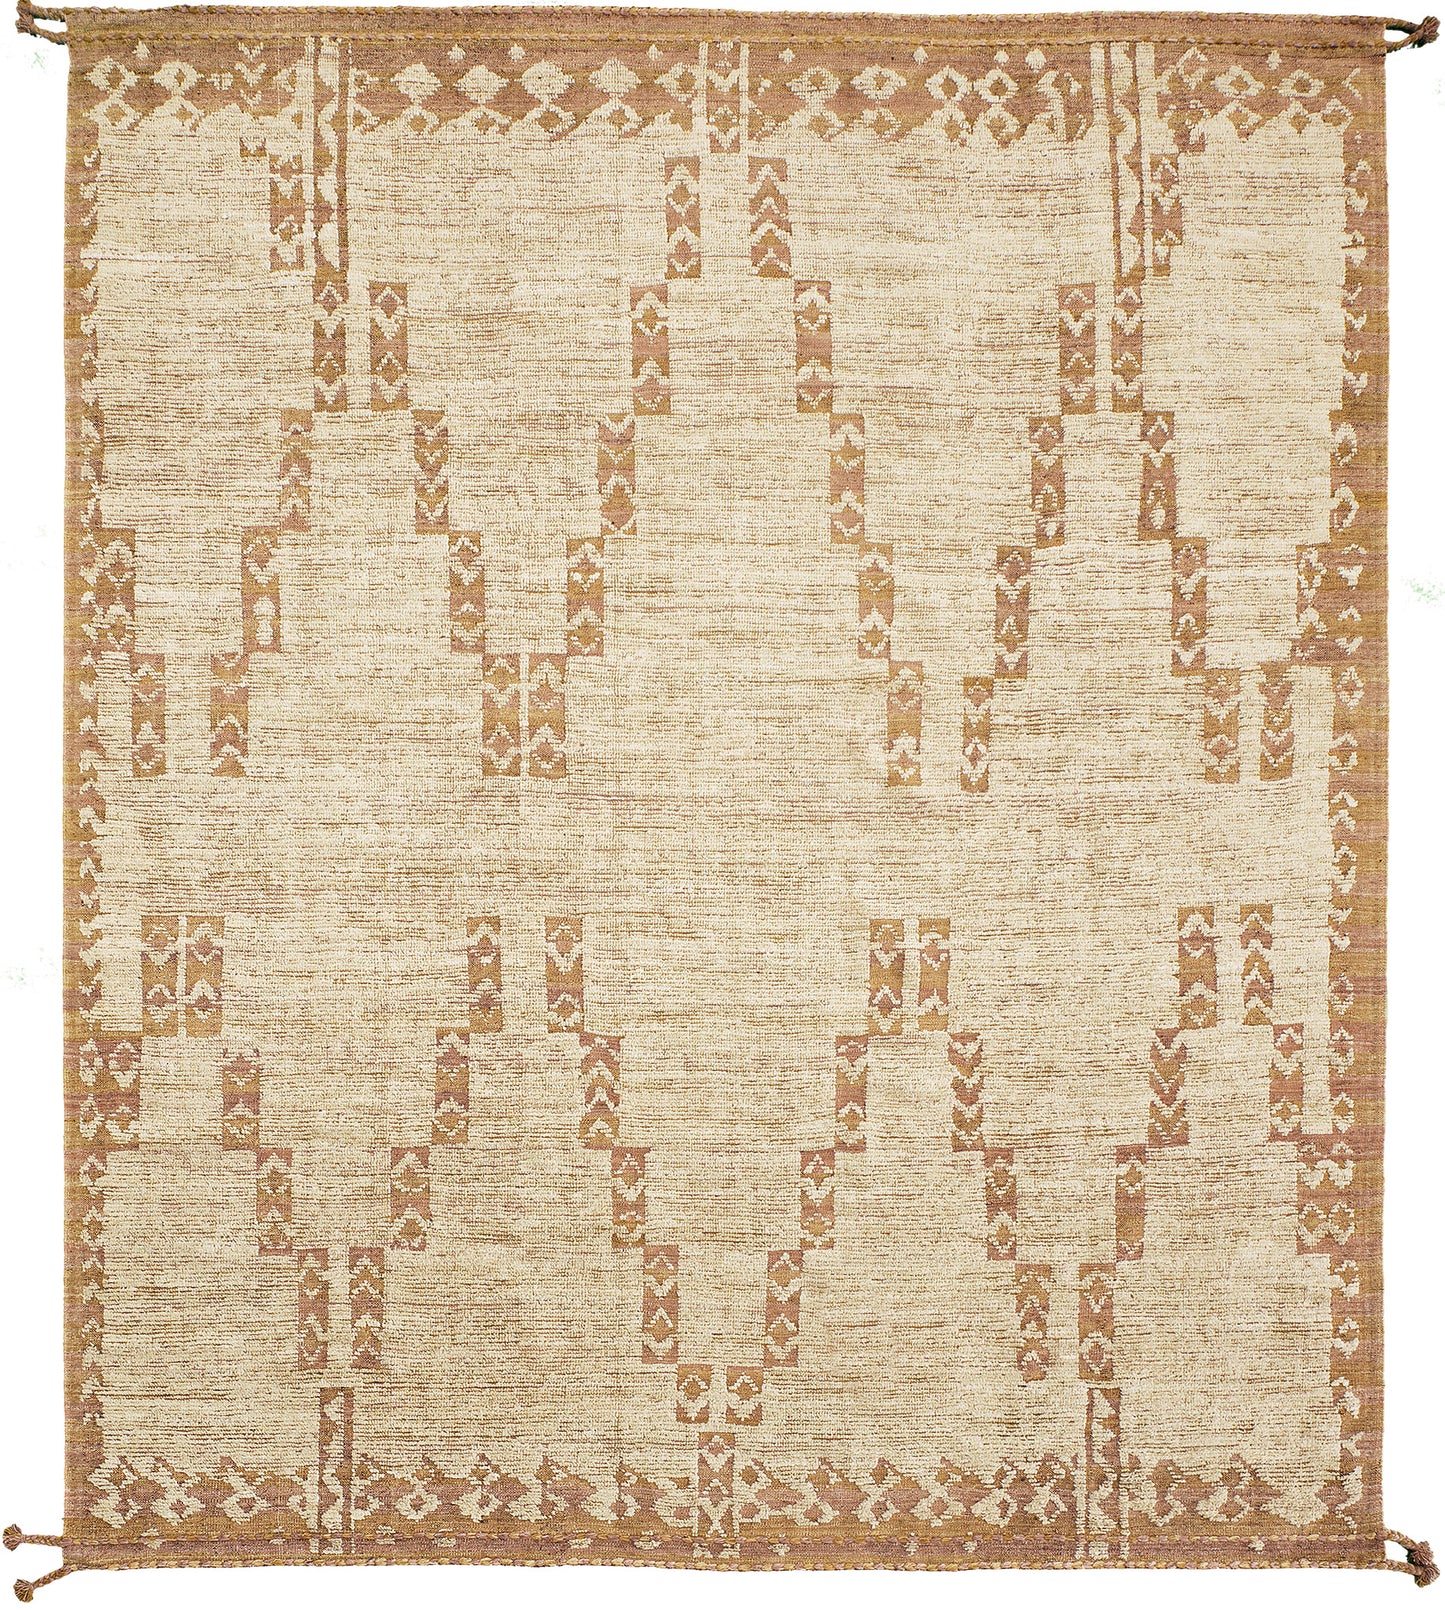 Modern Rug Image 11888 Tivawin, Nomad Collection